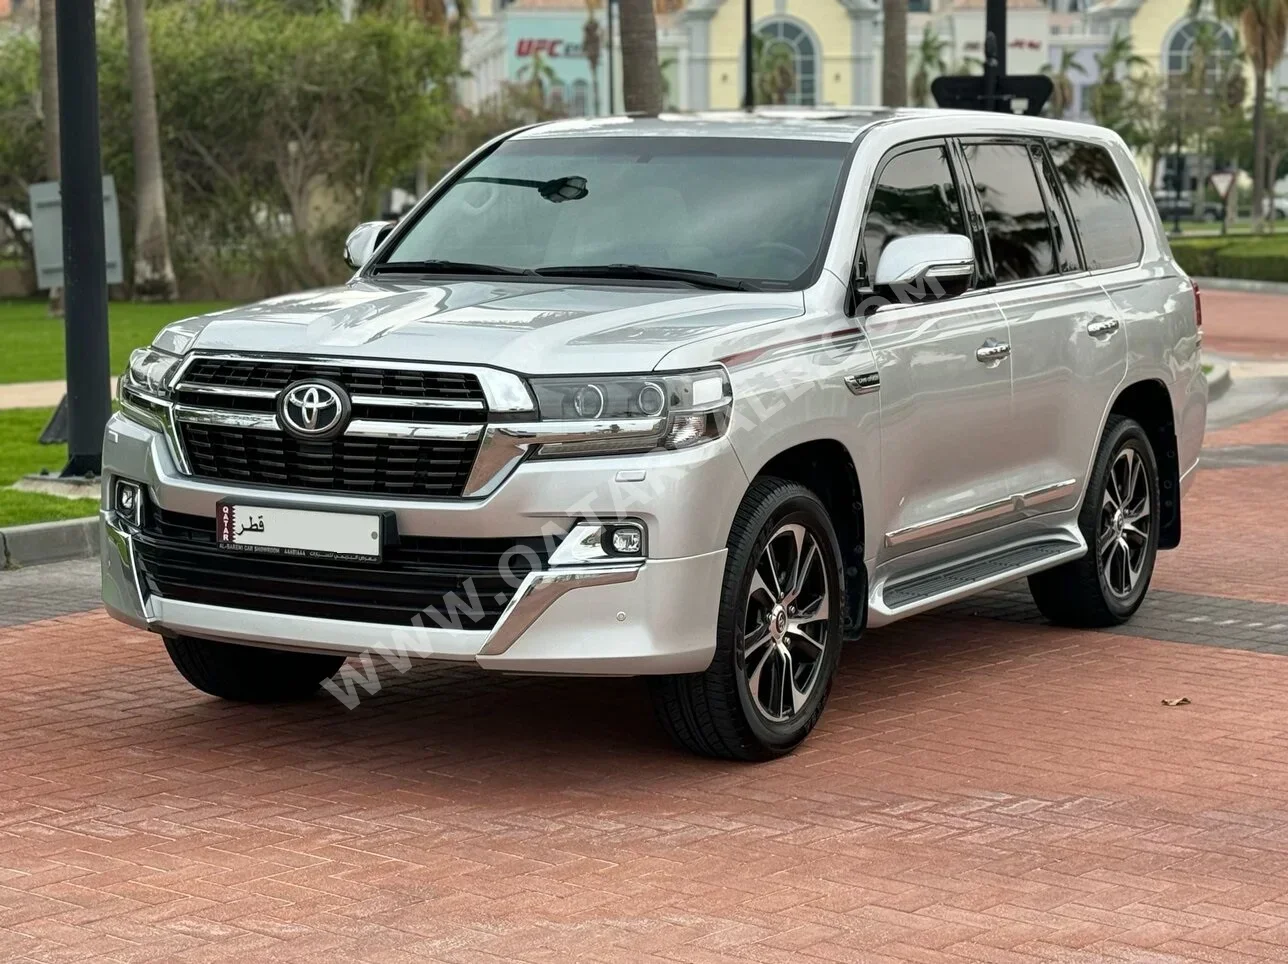 Toyota  Land Cruiser  GXR- Grand Touring  2021  Automatic  95,000 Km  6 Cylinder  Four Wheel Drive (4WD)  SUV  Silver  With Warranty